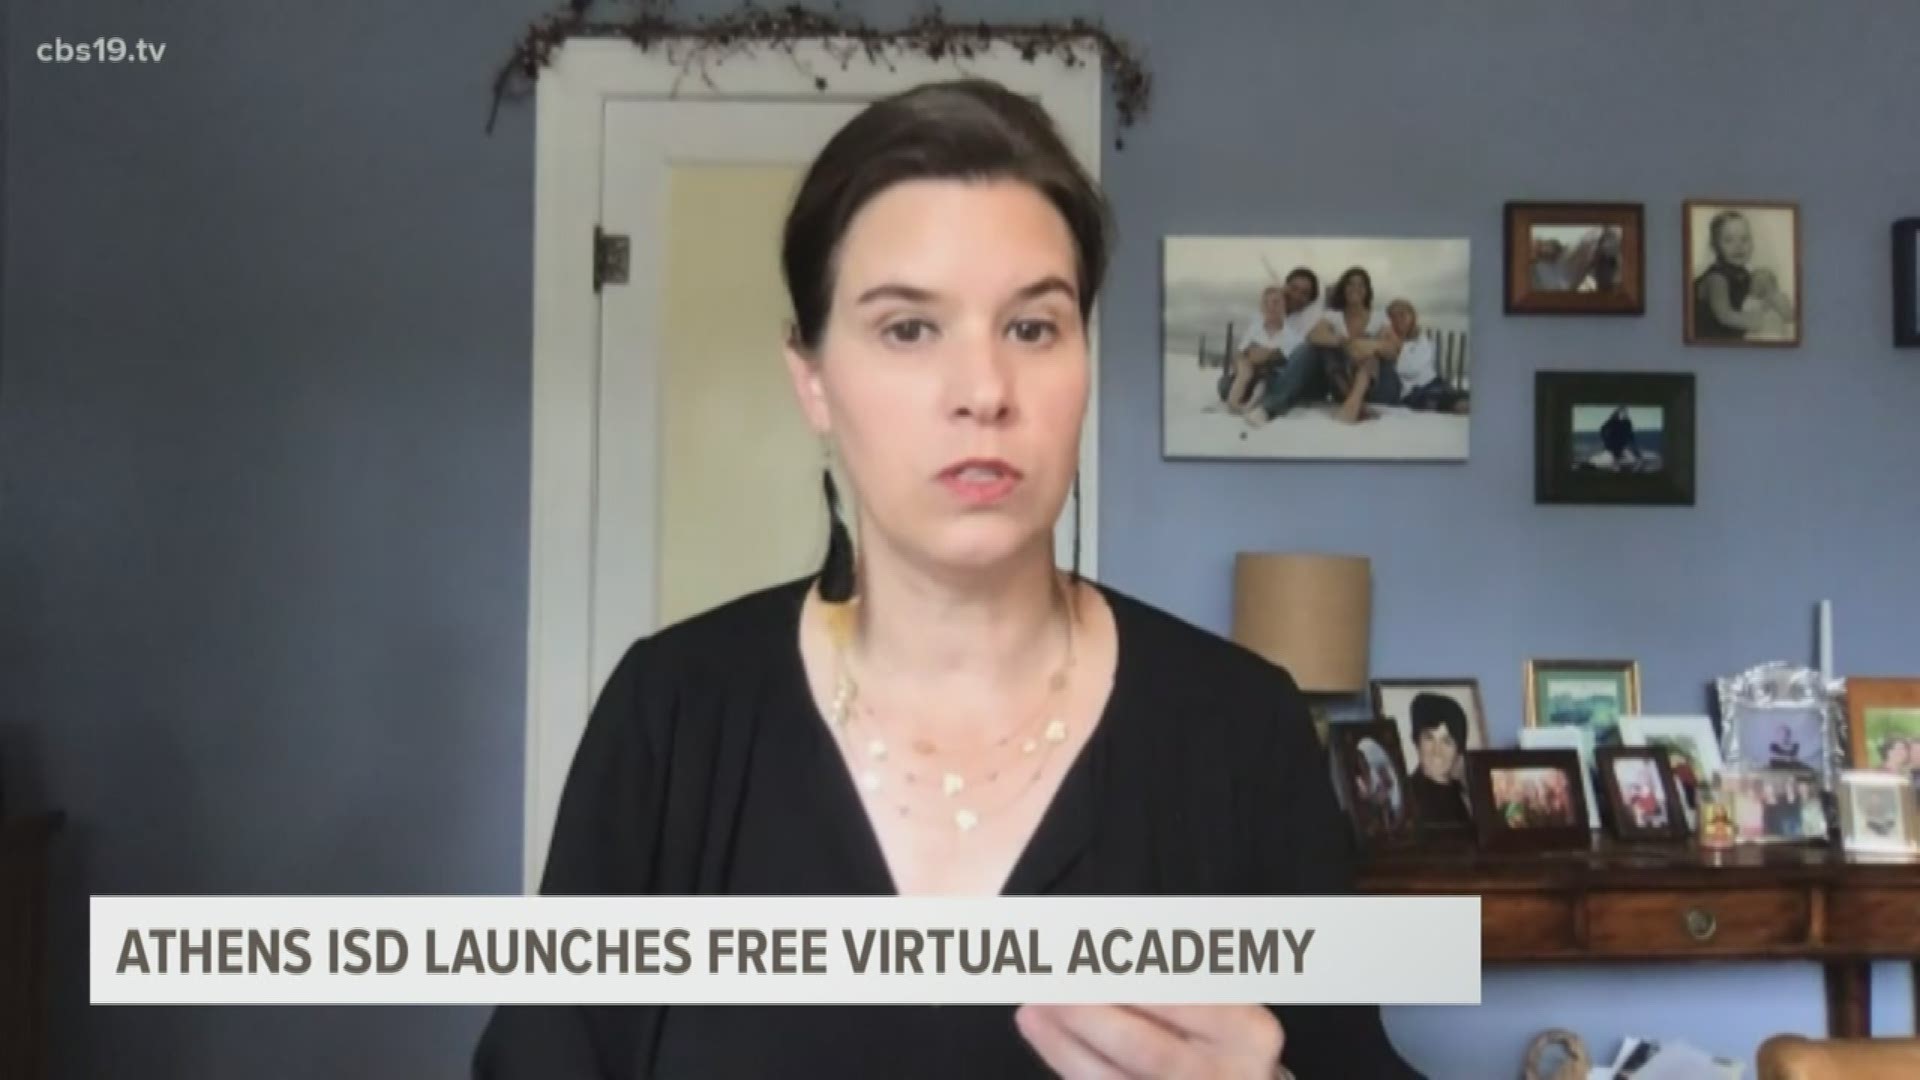 According to Athens ISD, the virtual academy will start in the fall of 2020. They are currently accepting applications.